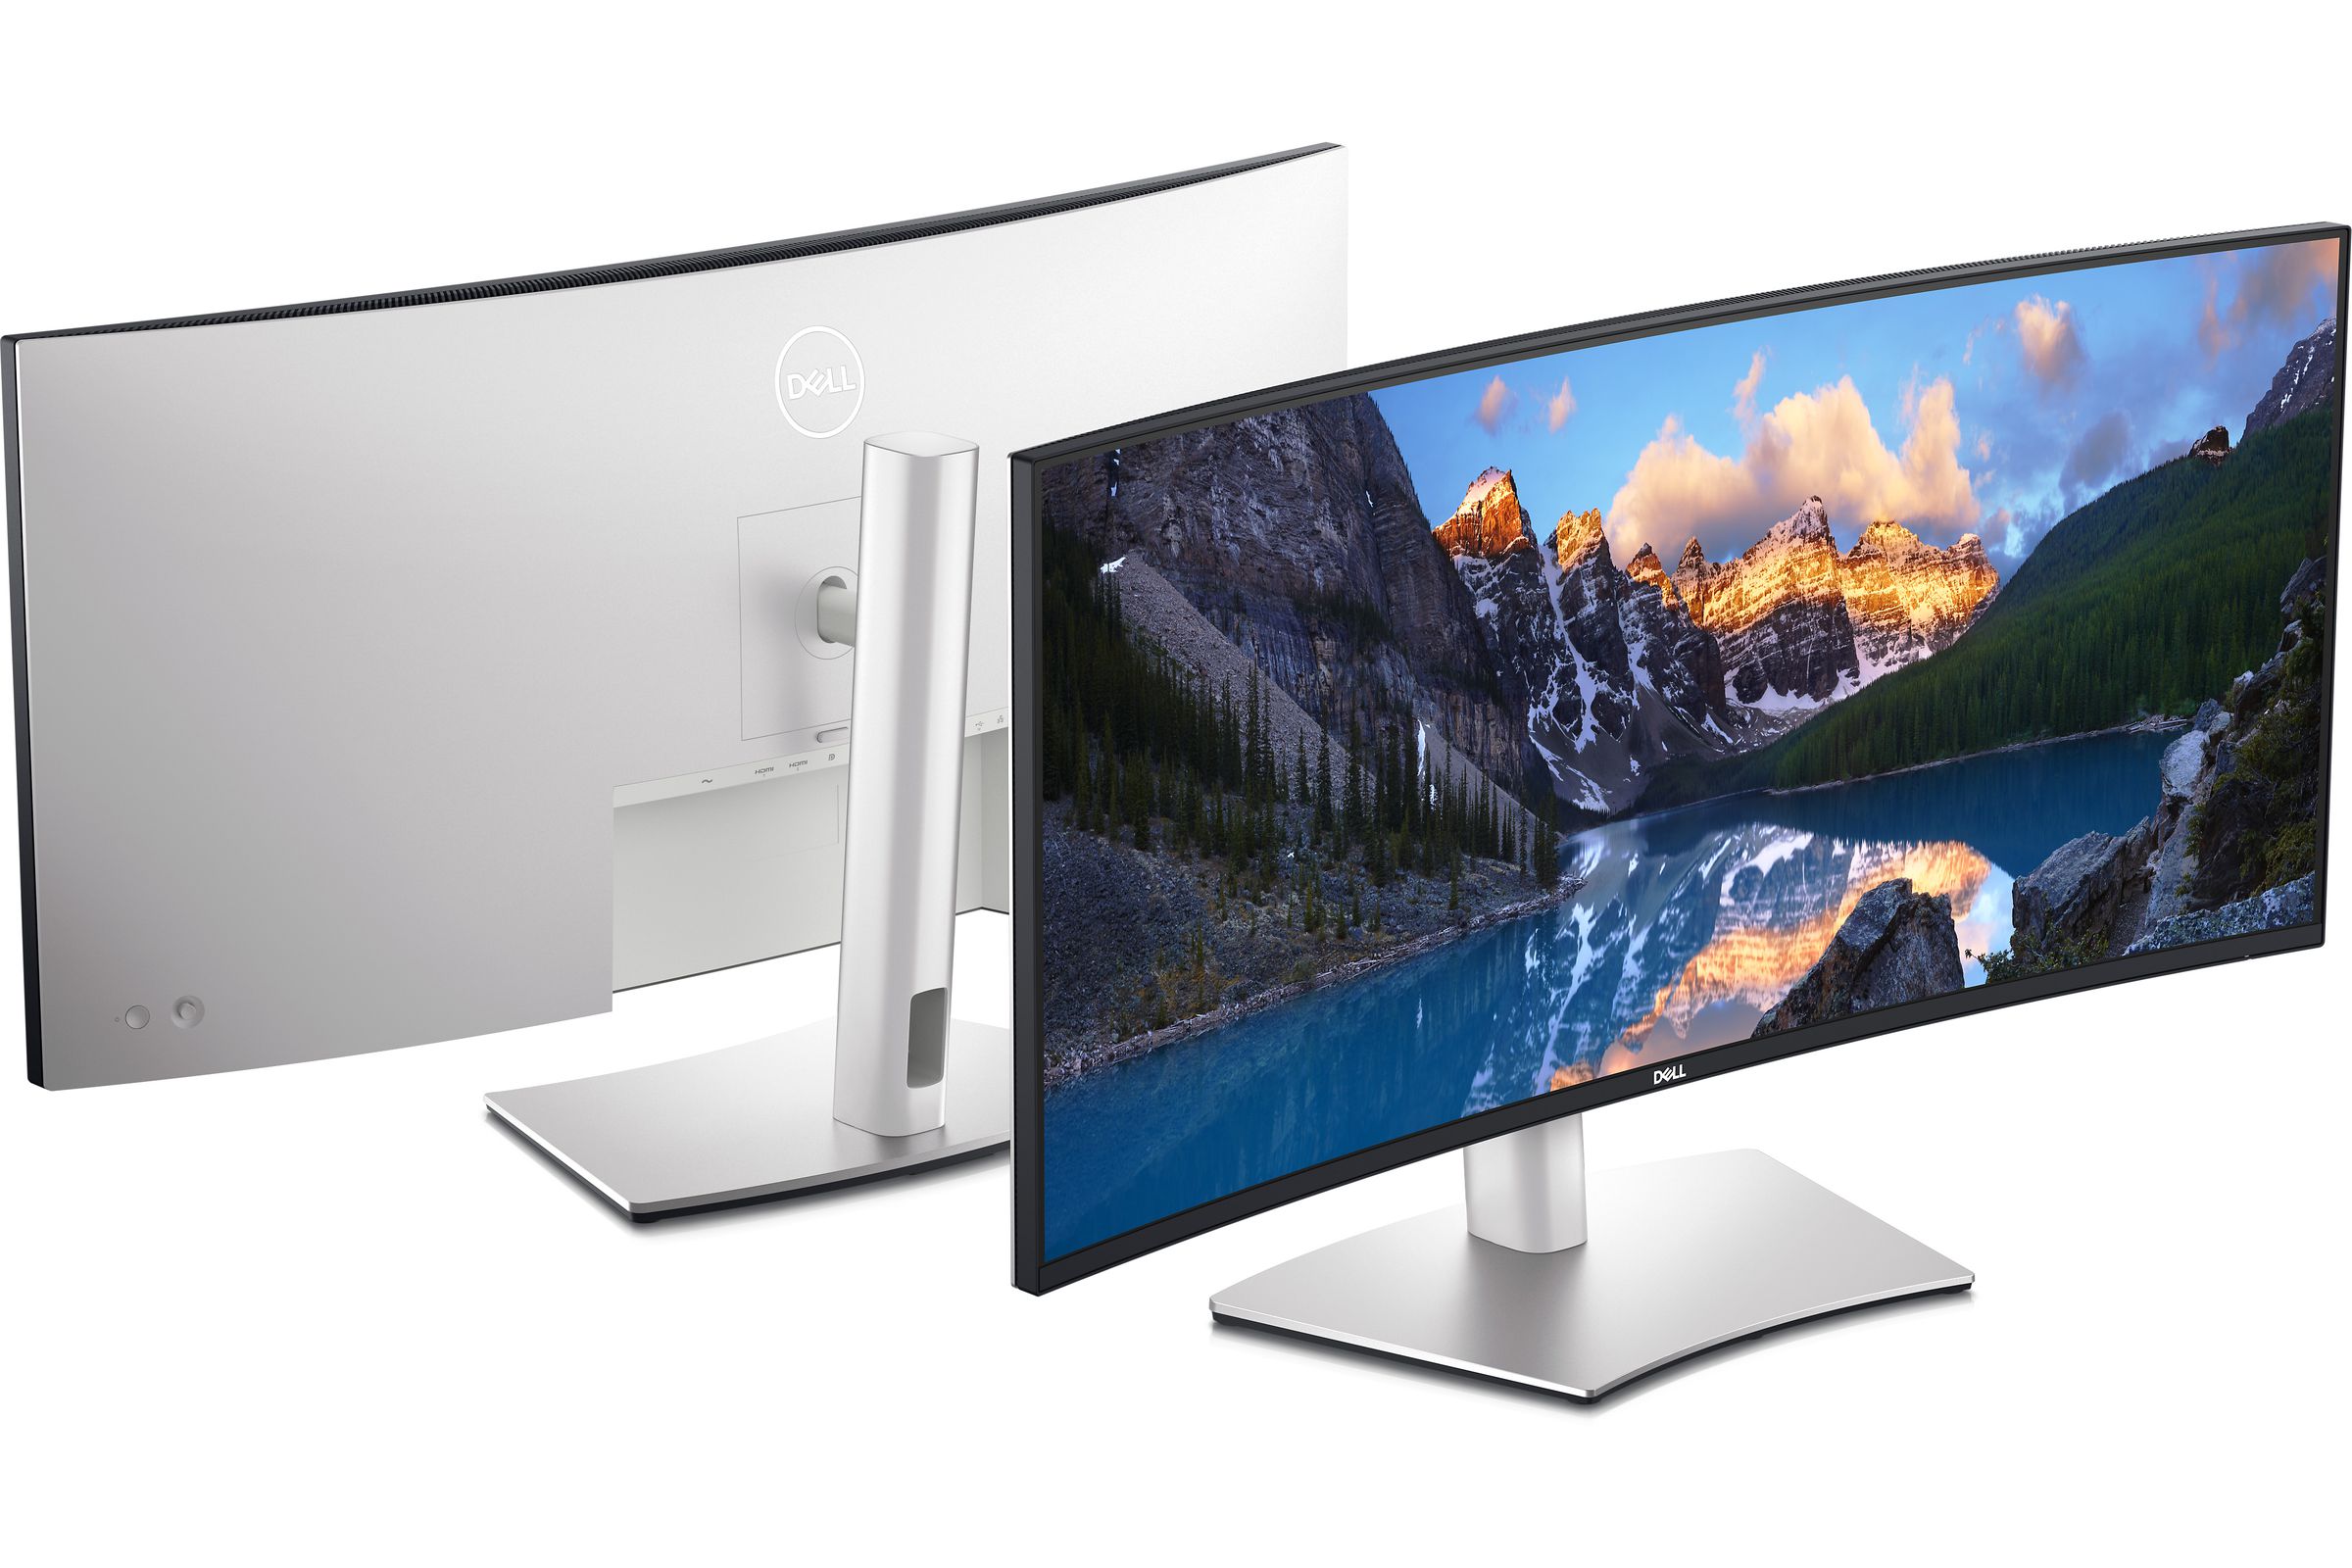 Dell’s 37.5-inch curved ultrawide monitor from the front and back.